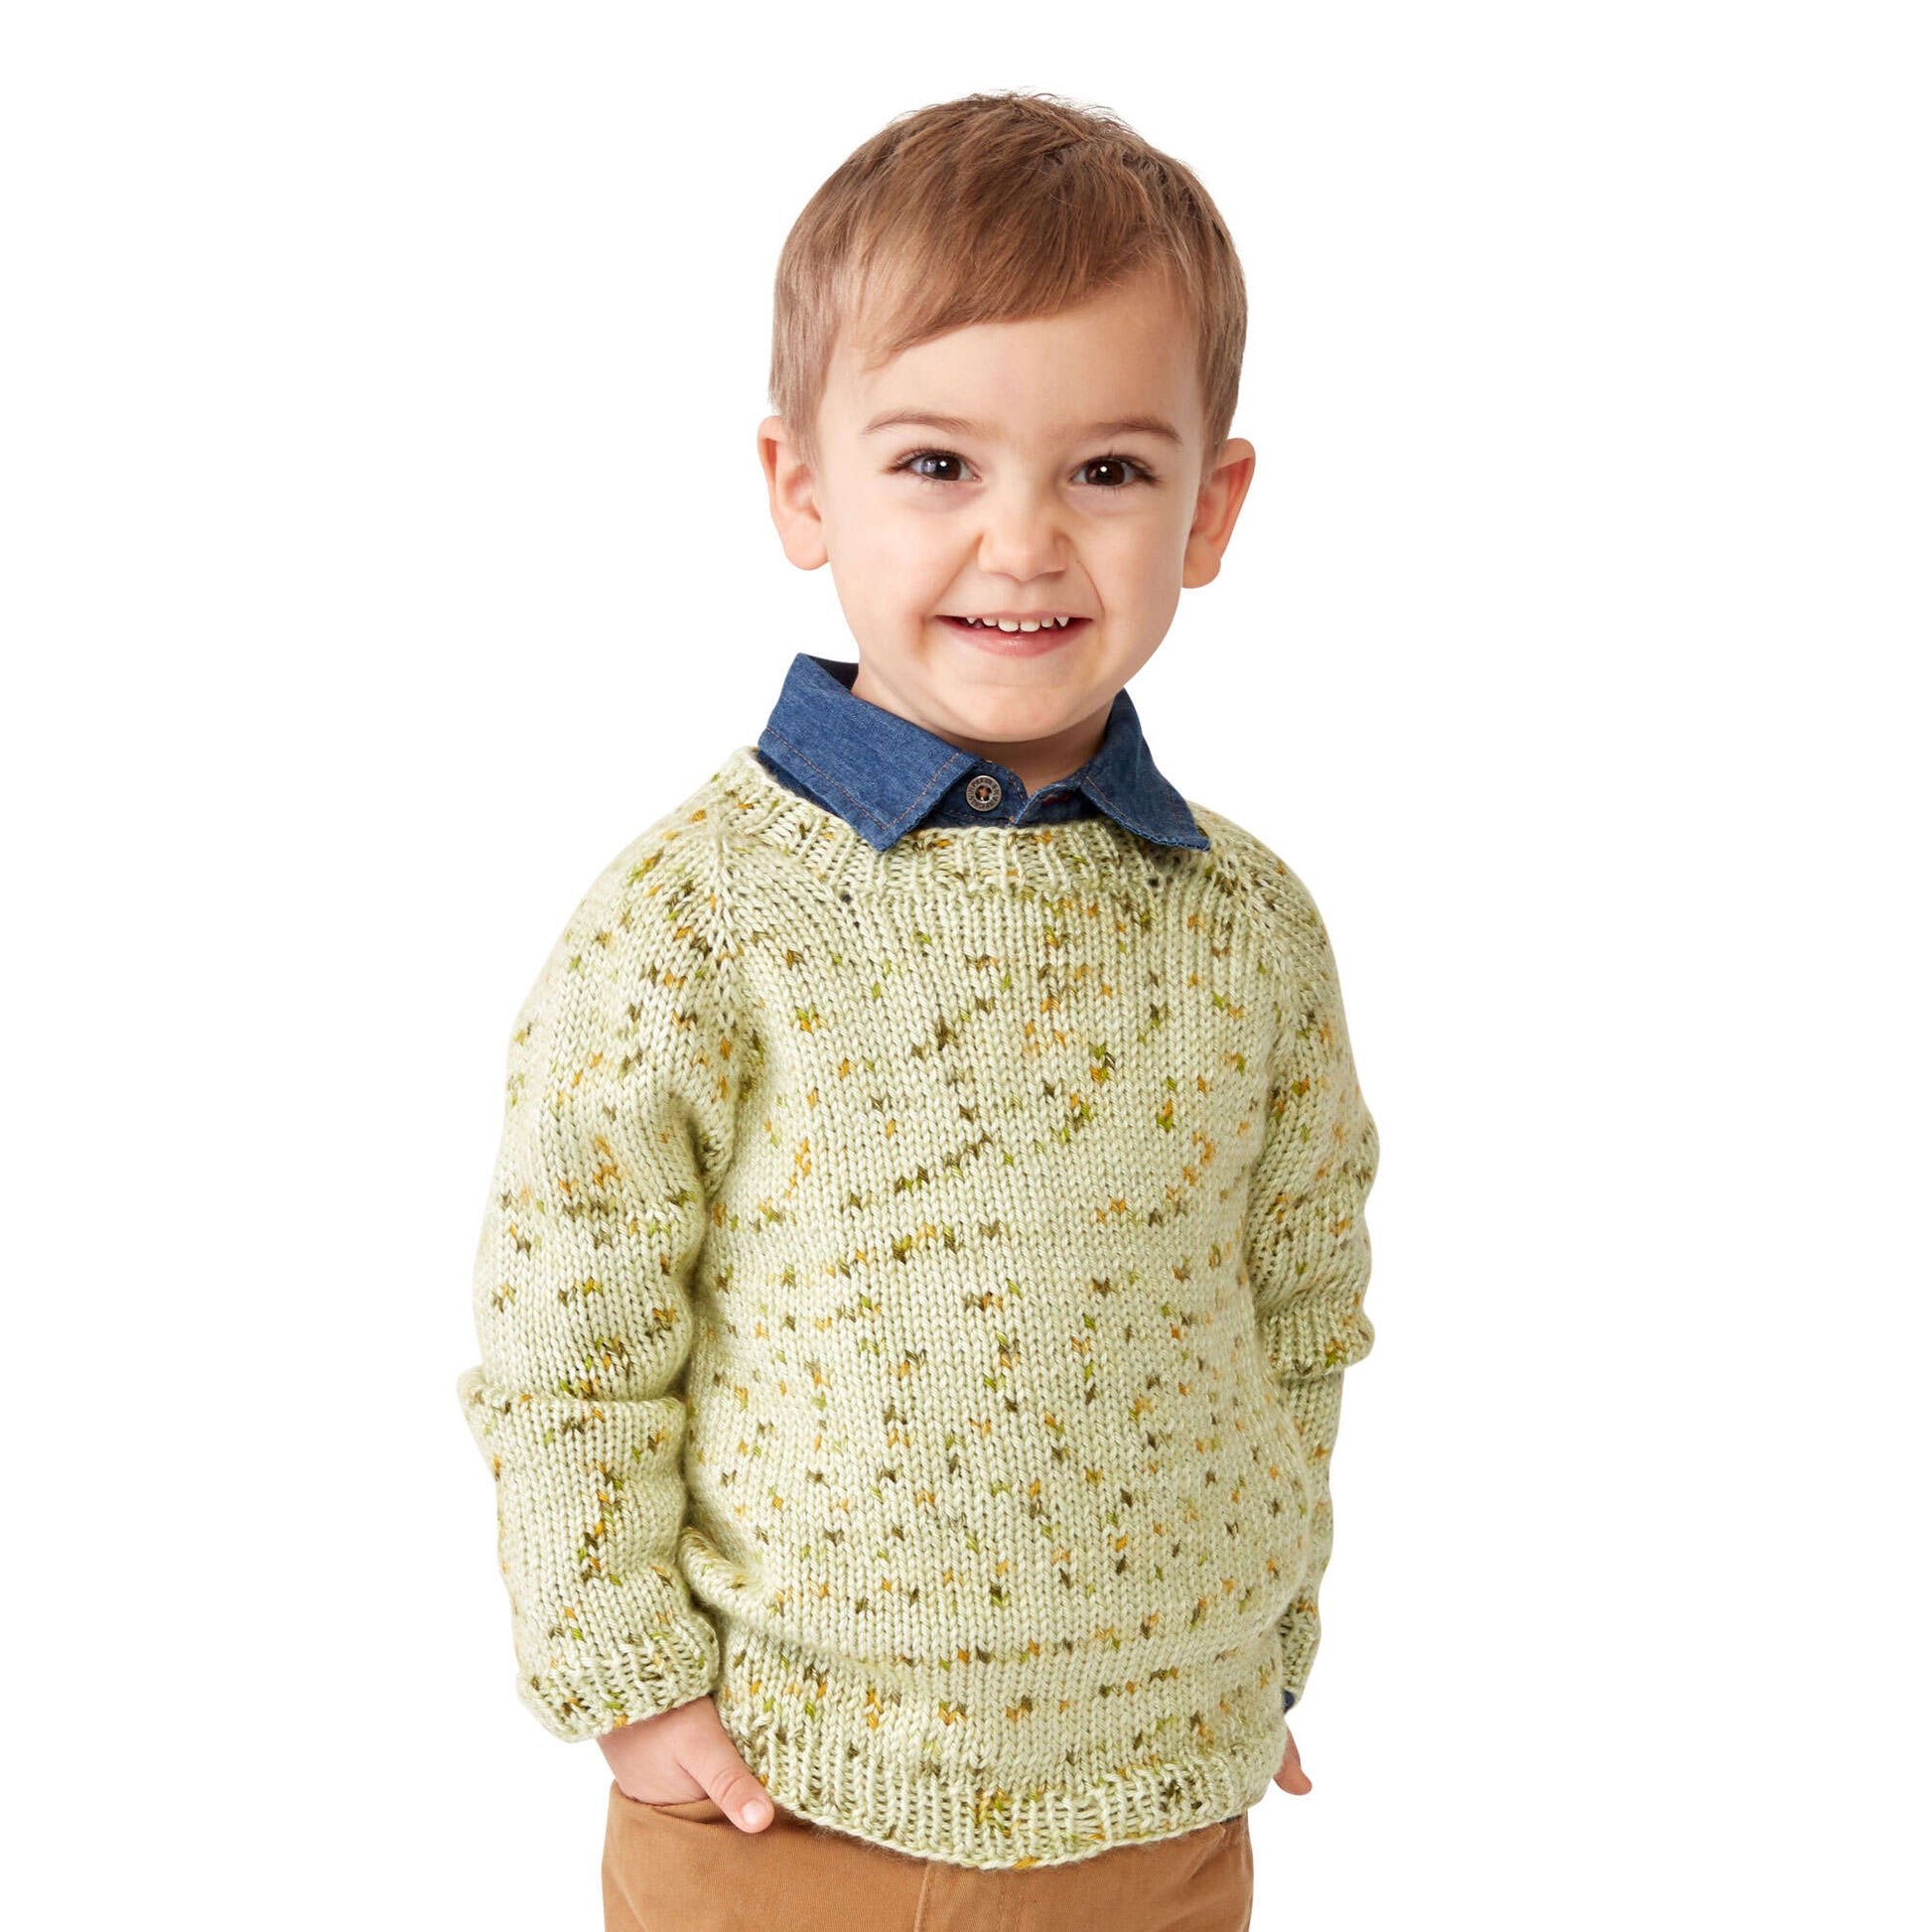 Caron Top Down Knit Baby Pullover | Yarnspirations